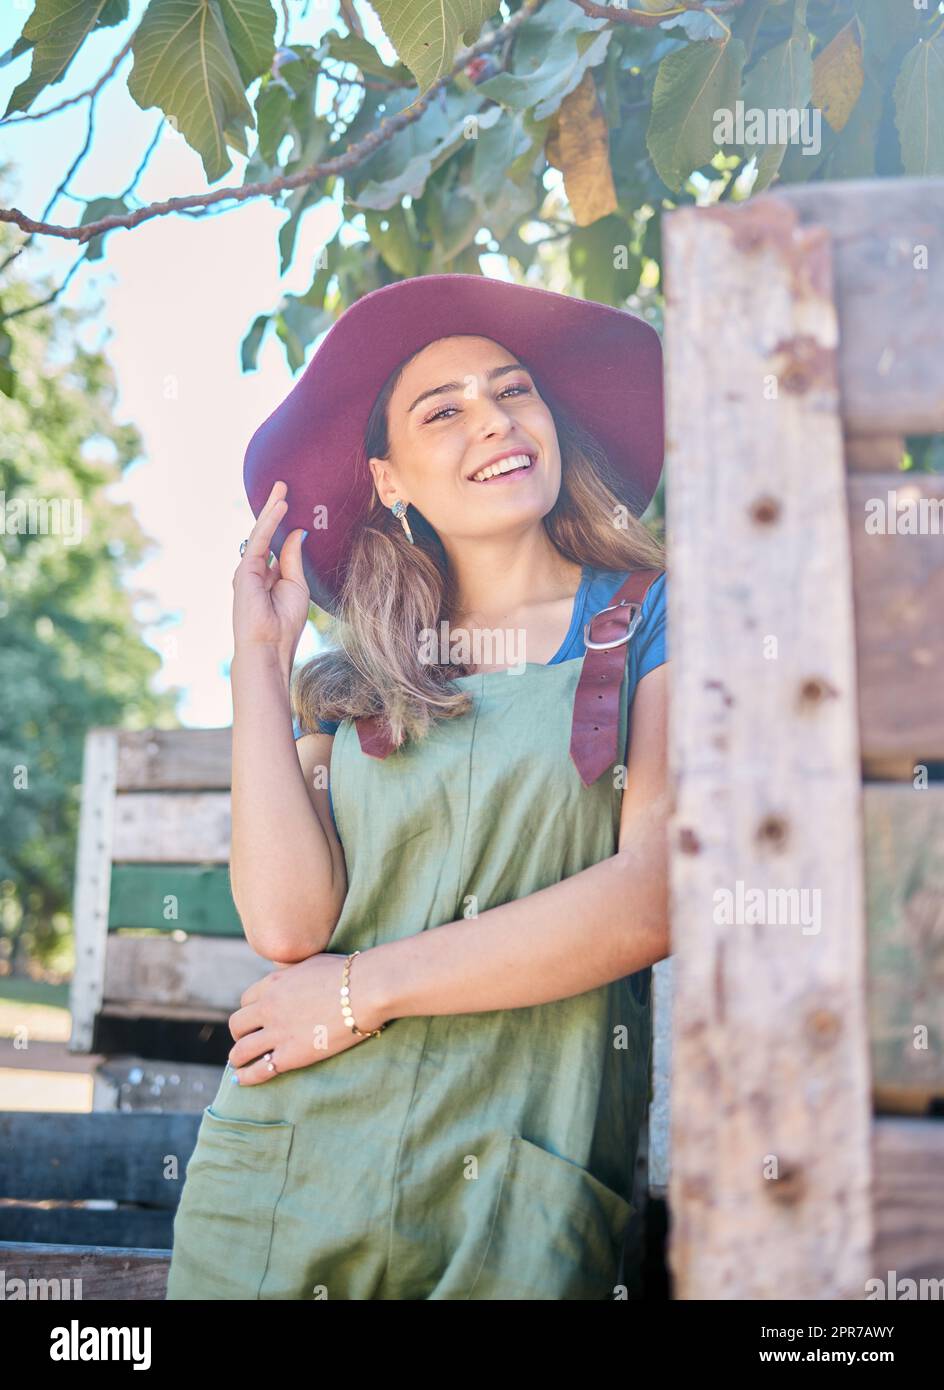 https://c8.alamy.com/comp/2PR7AWY/portrait-of-a-woman-in-a-straw-hat-standing-under-a-tree-next-to-a-rustic-wooden-crate-one-young-happy-female-wearing-a-summer-hat-and-dungaree-dress-in-a-garden-on-a-sunny-day-picking-apples-2PR7AWY.jpg